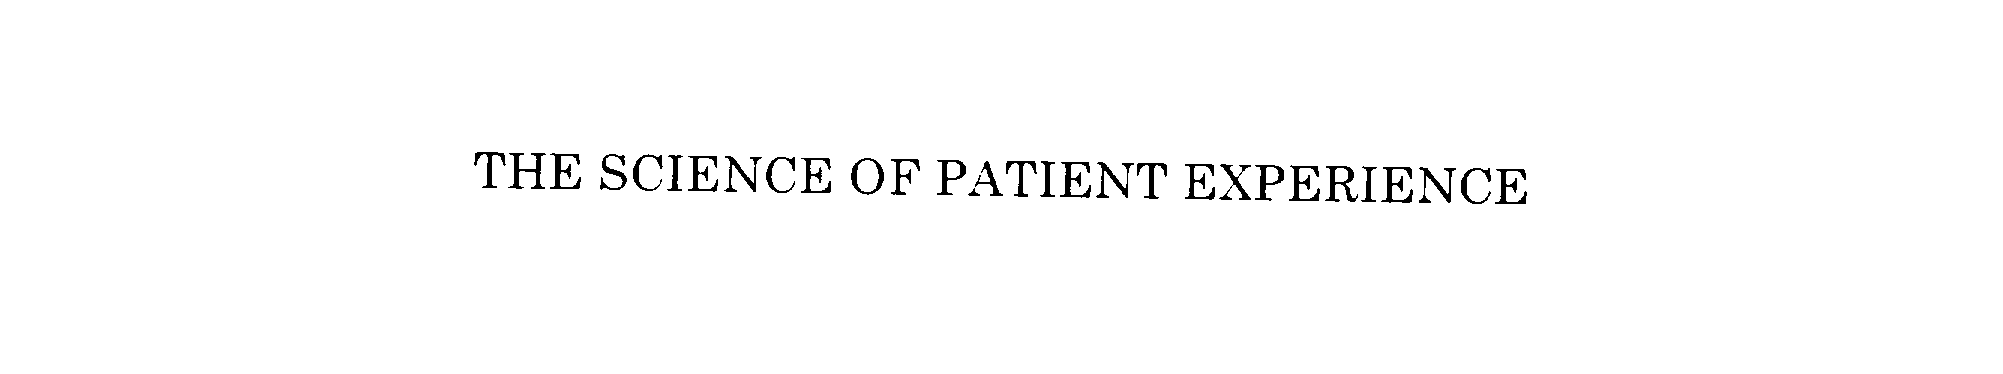 Trademark Logo THE SCIENCE OF PATIENT EXPERIENCE